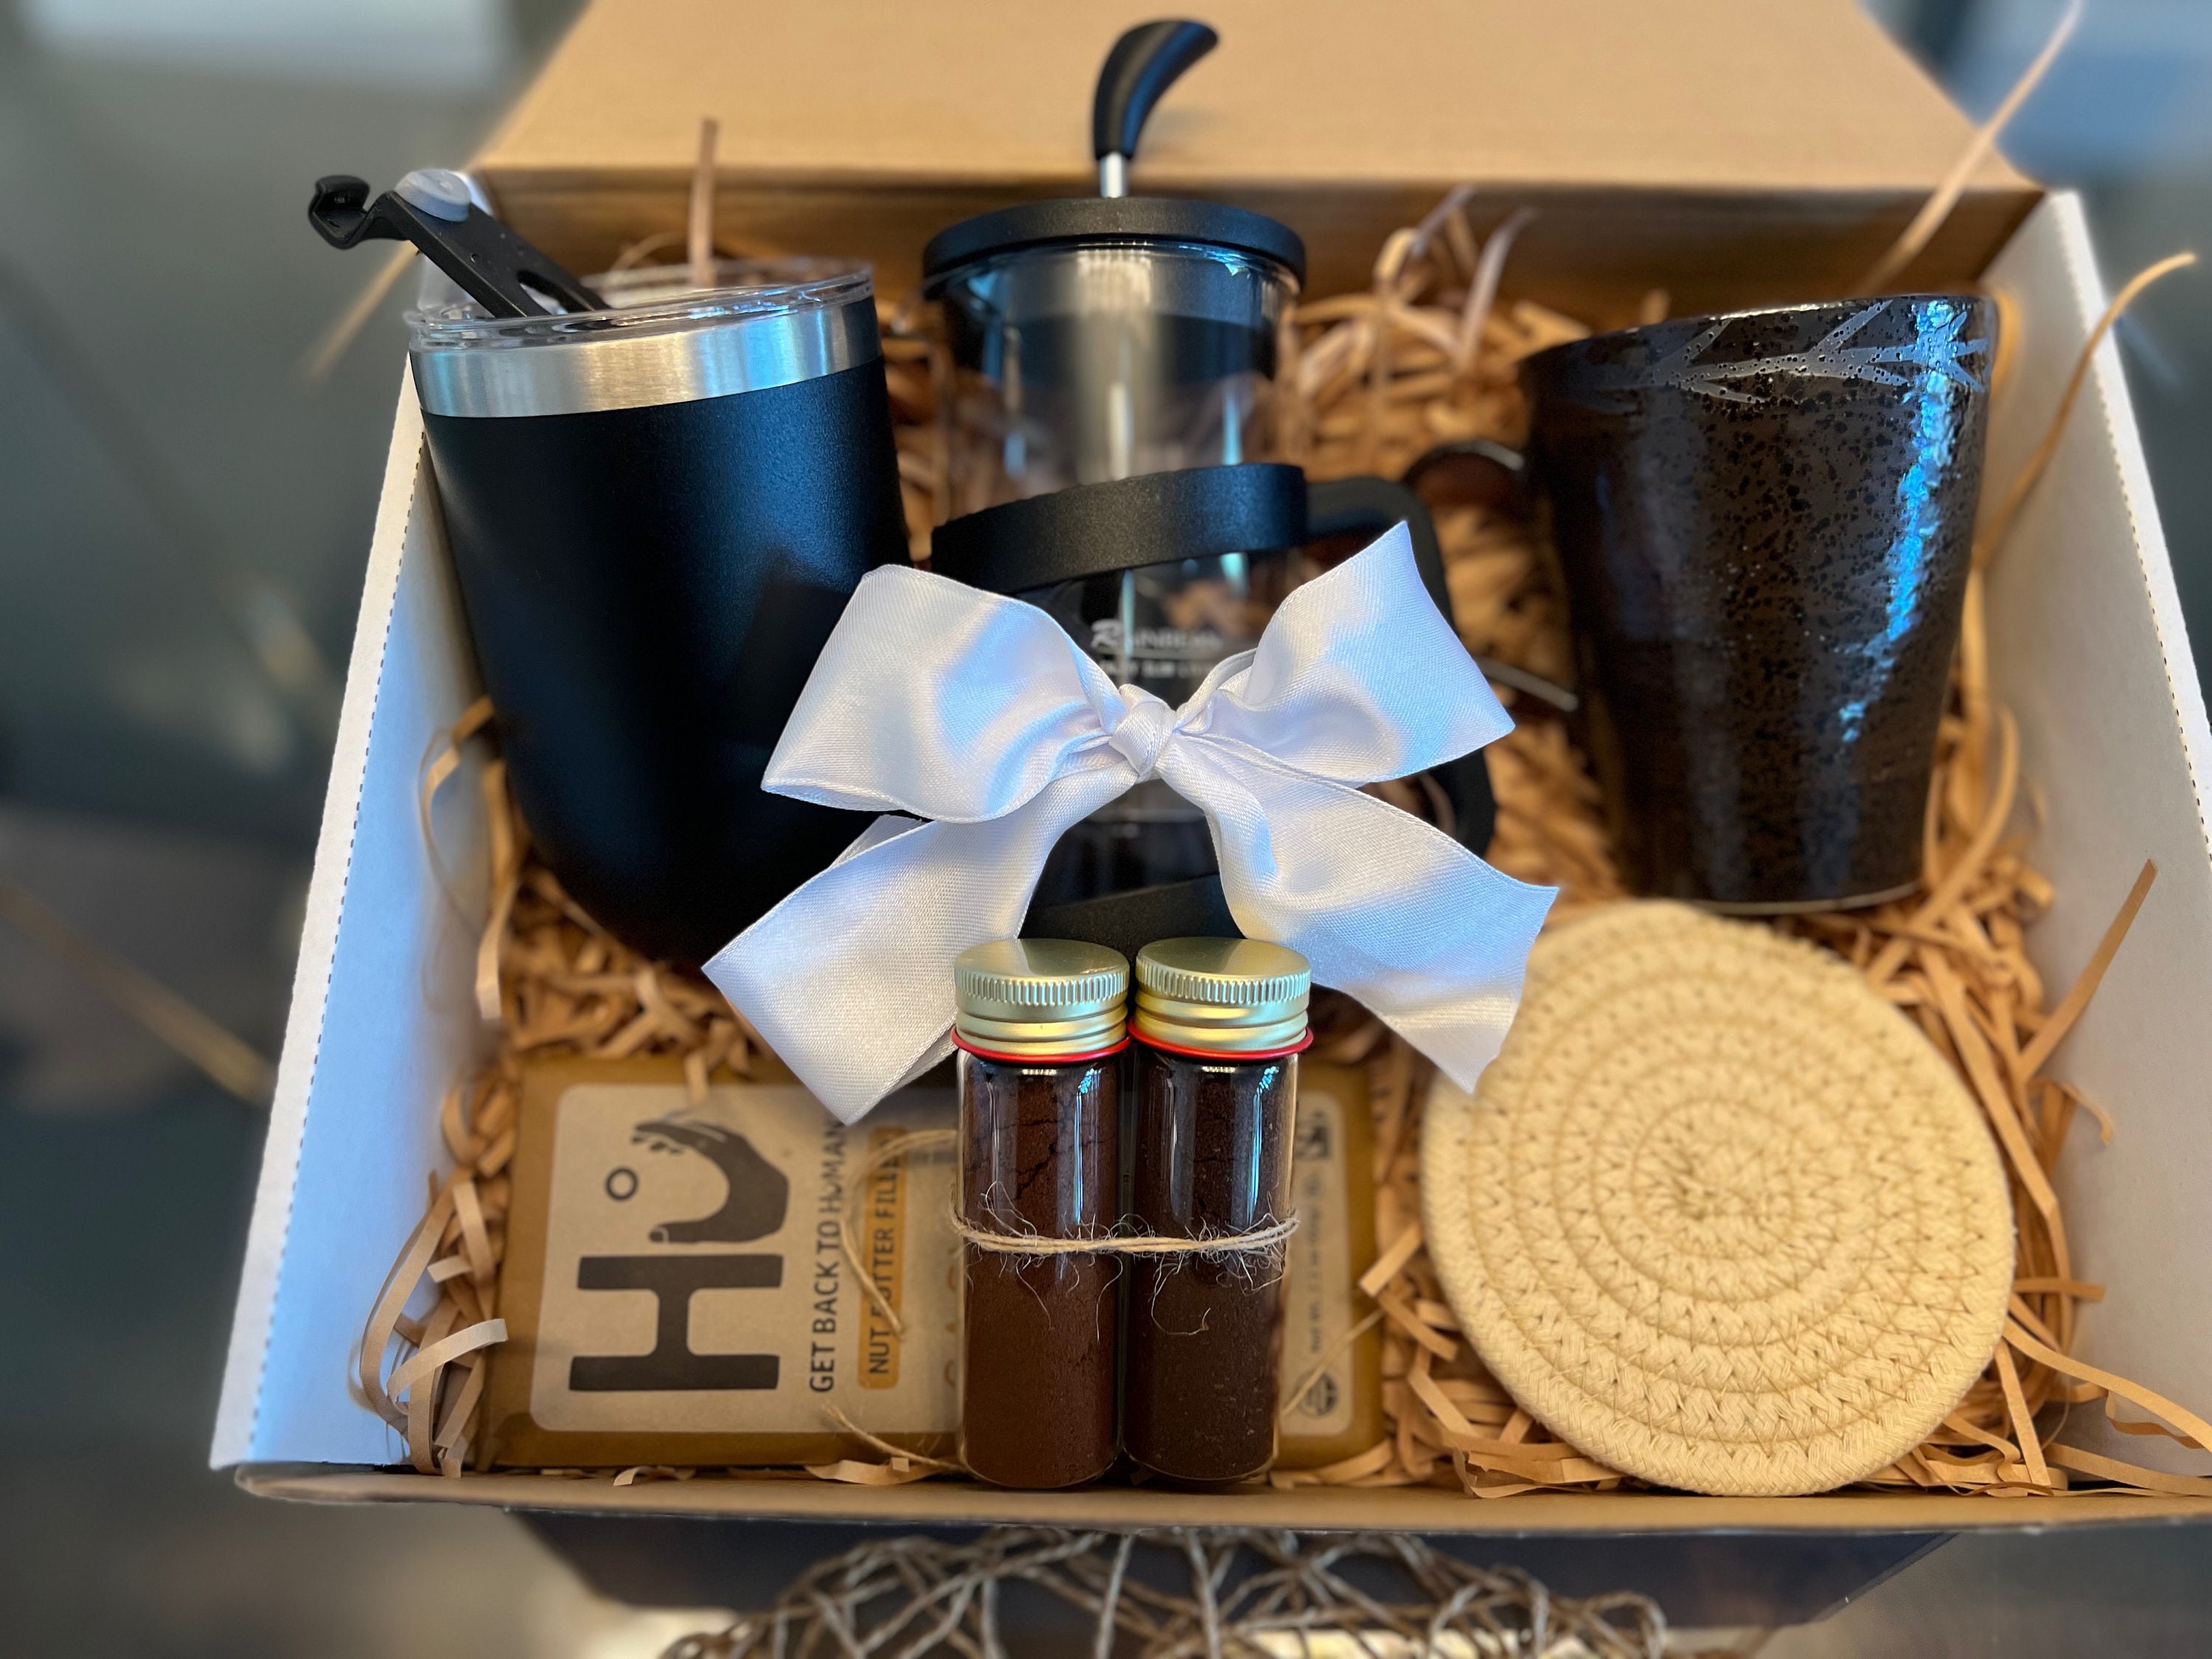 Coffee Lover Gift Box By Silly Obsessions. Unique Gift Basket for birthday,  new home warming, housewarming, dinner party. Best Coffee Gift Set for